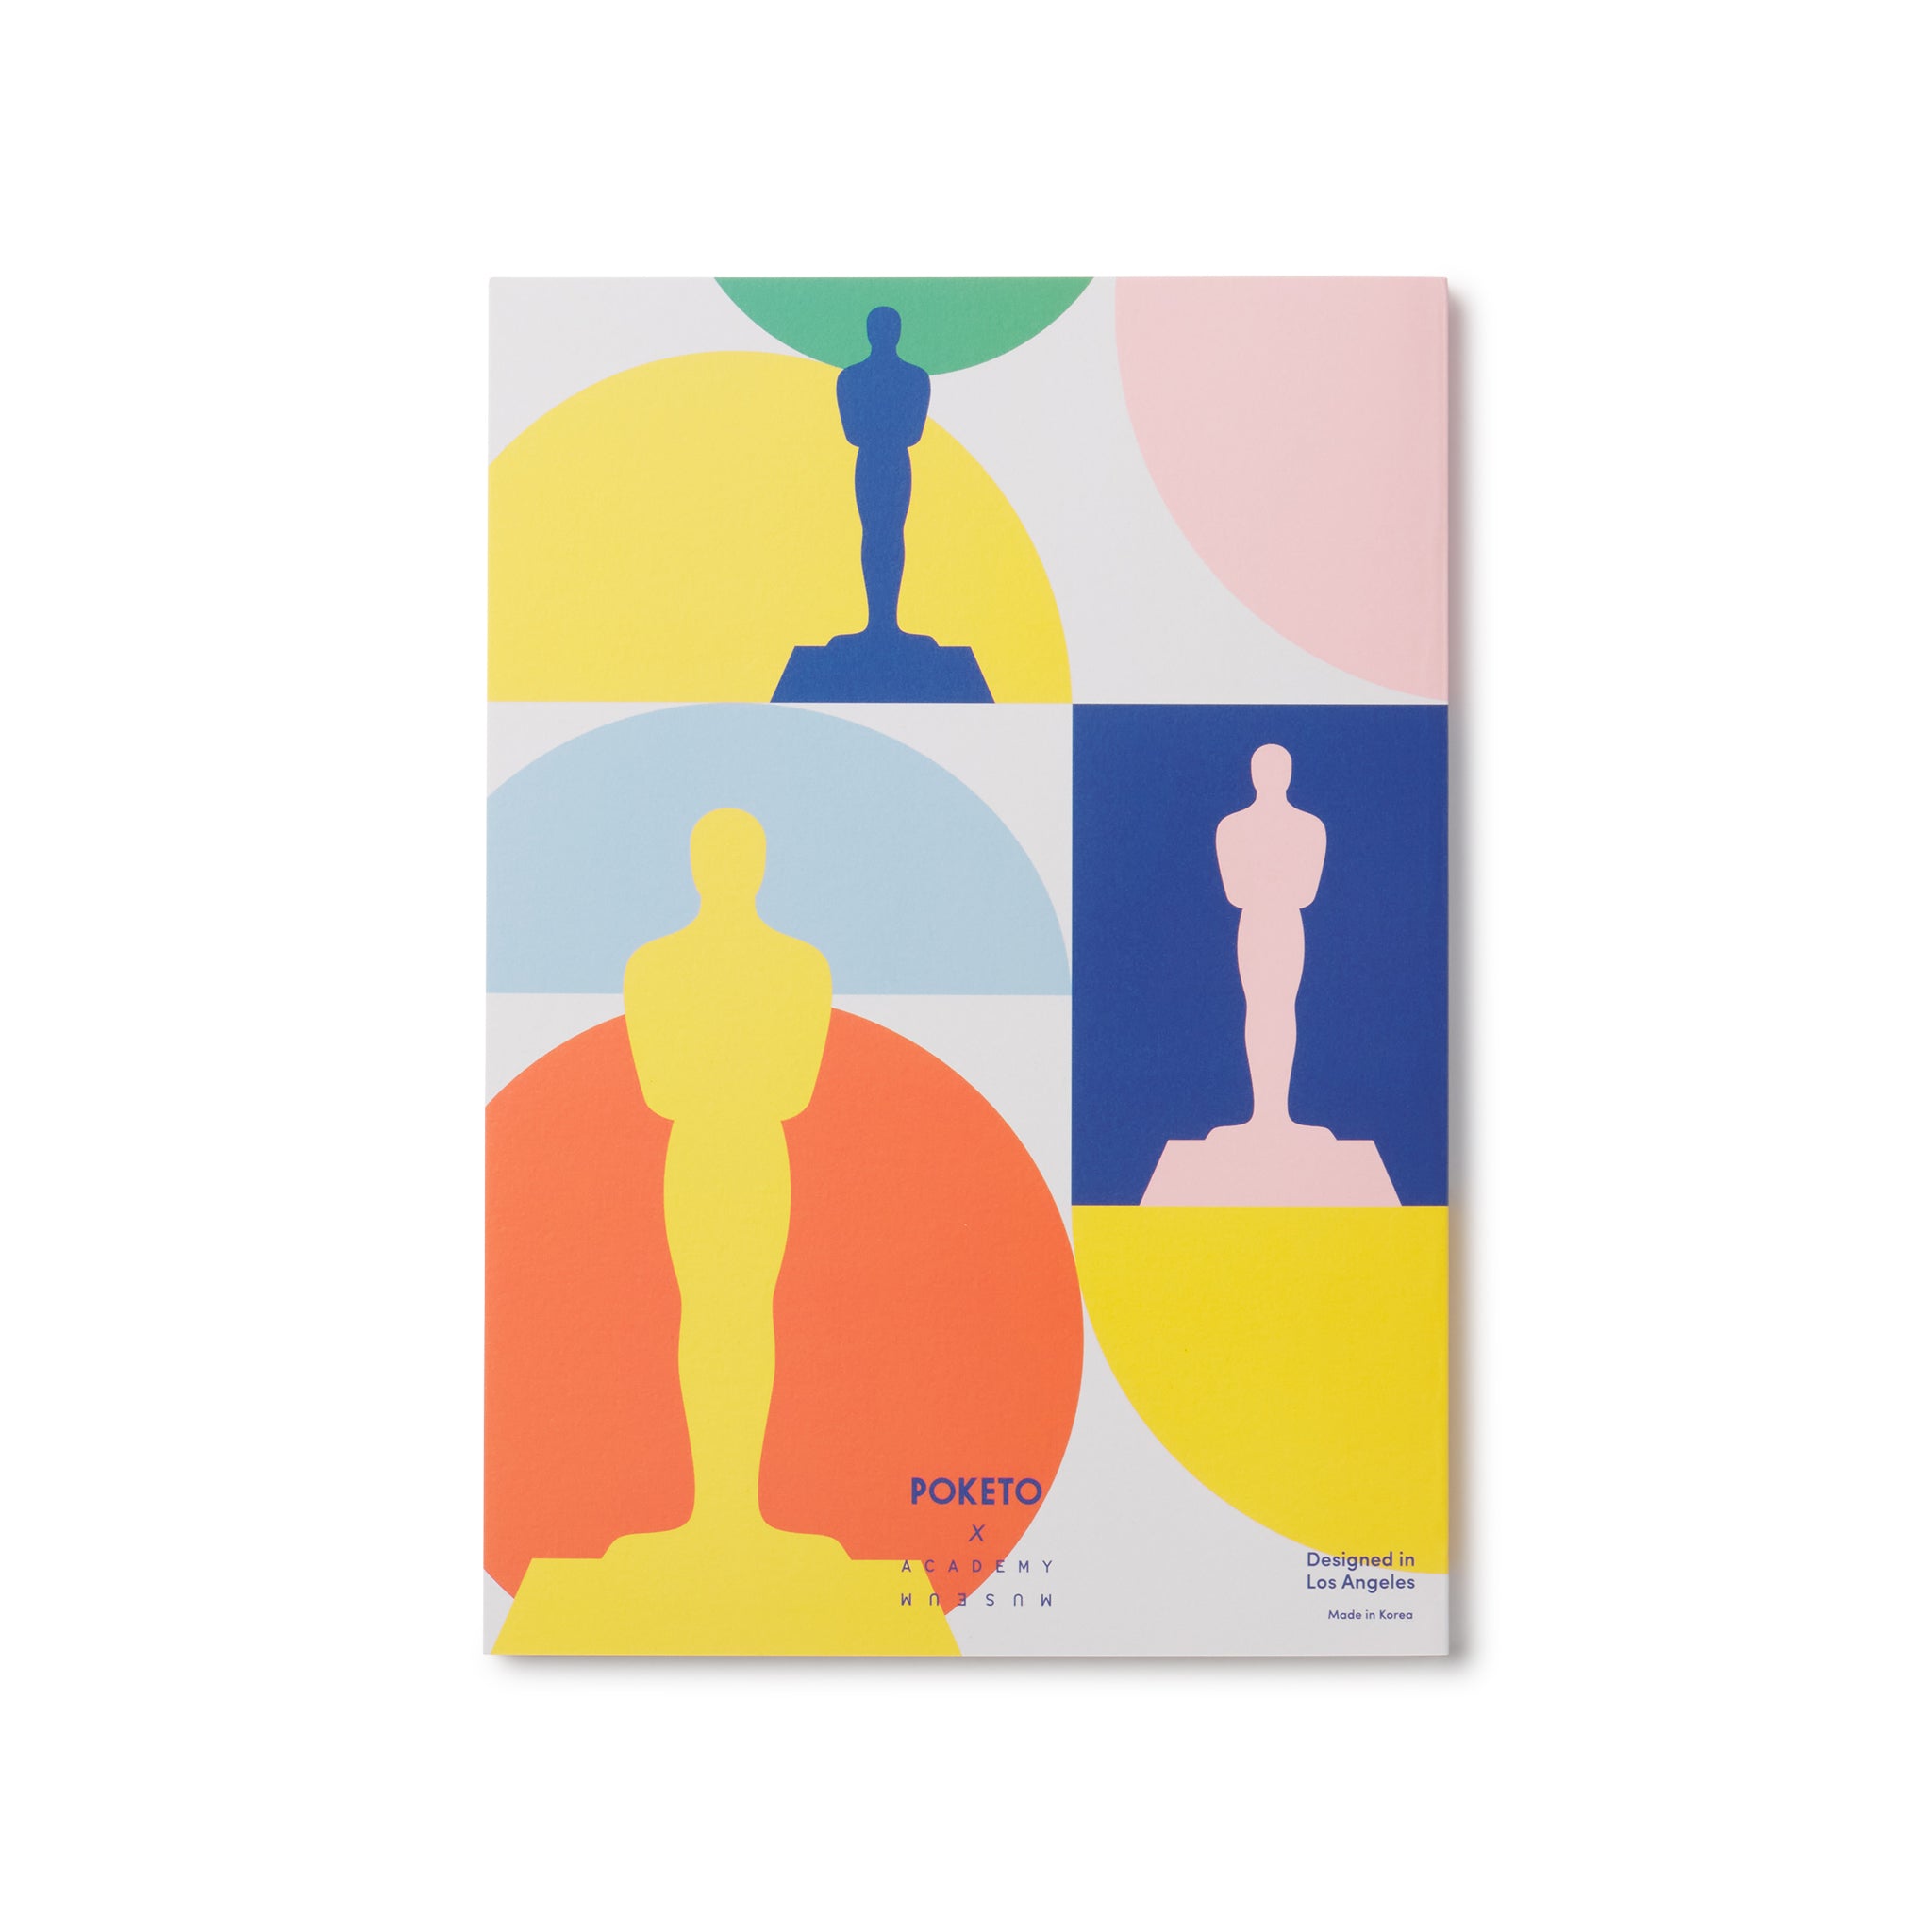 ABSTRACT OSCAR SIMPLE LINED NOTEBOOK